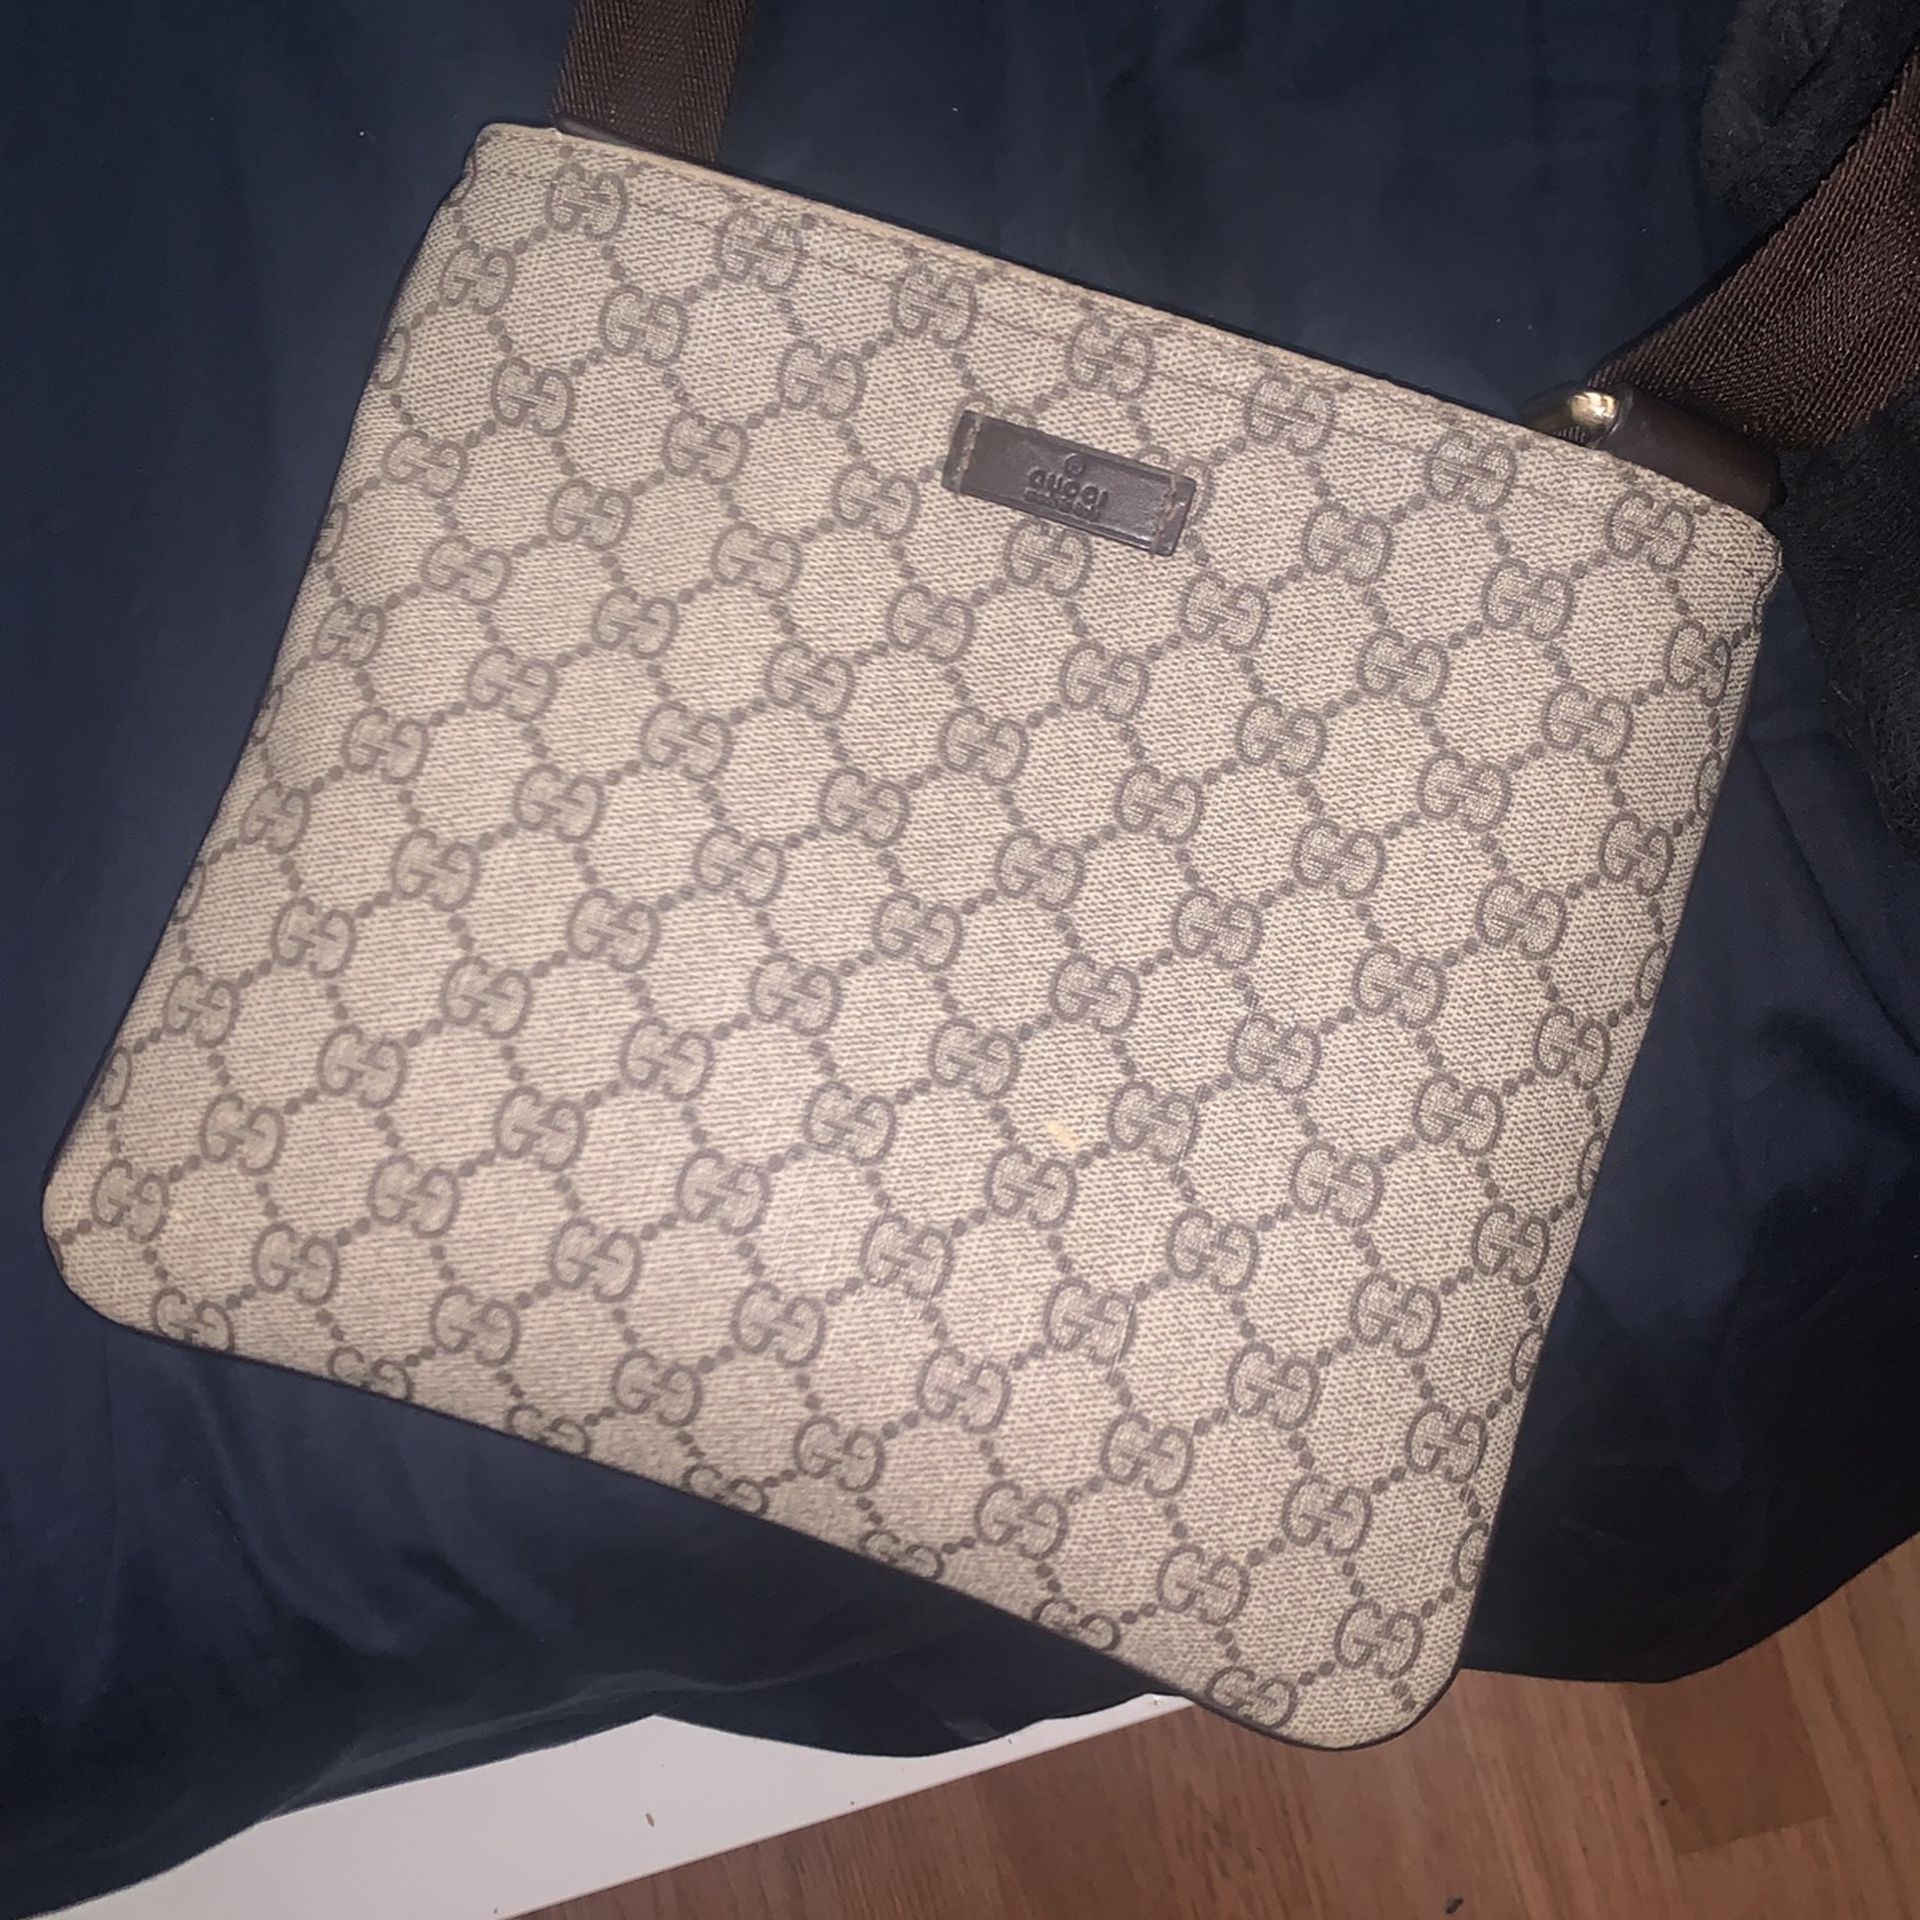 Gucci Marmont Nude Bag 446744 22x13x6cm for Sale in Yonkers, NY - OfferUp